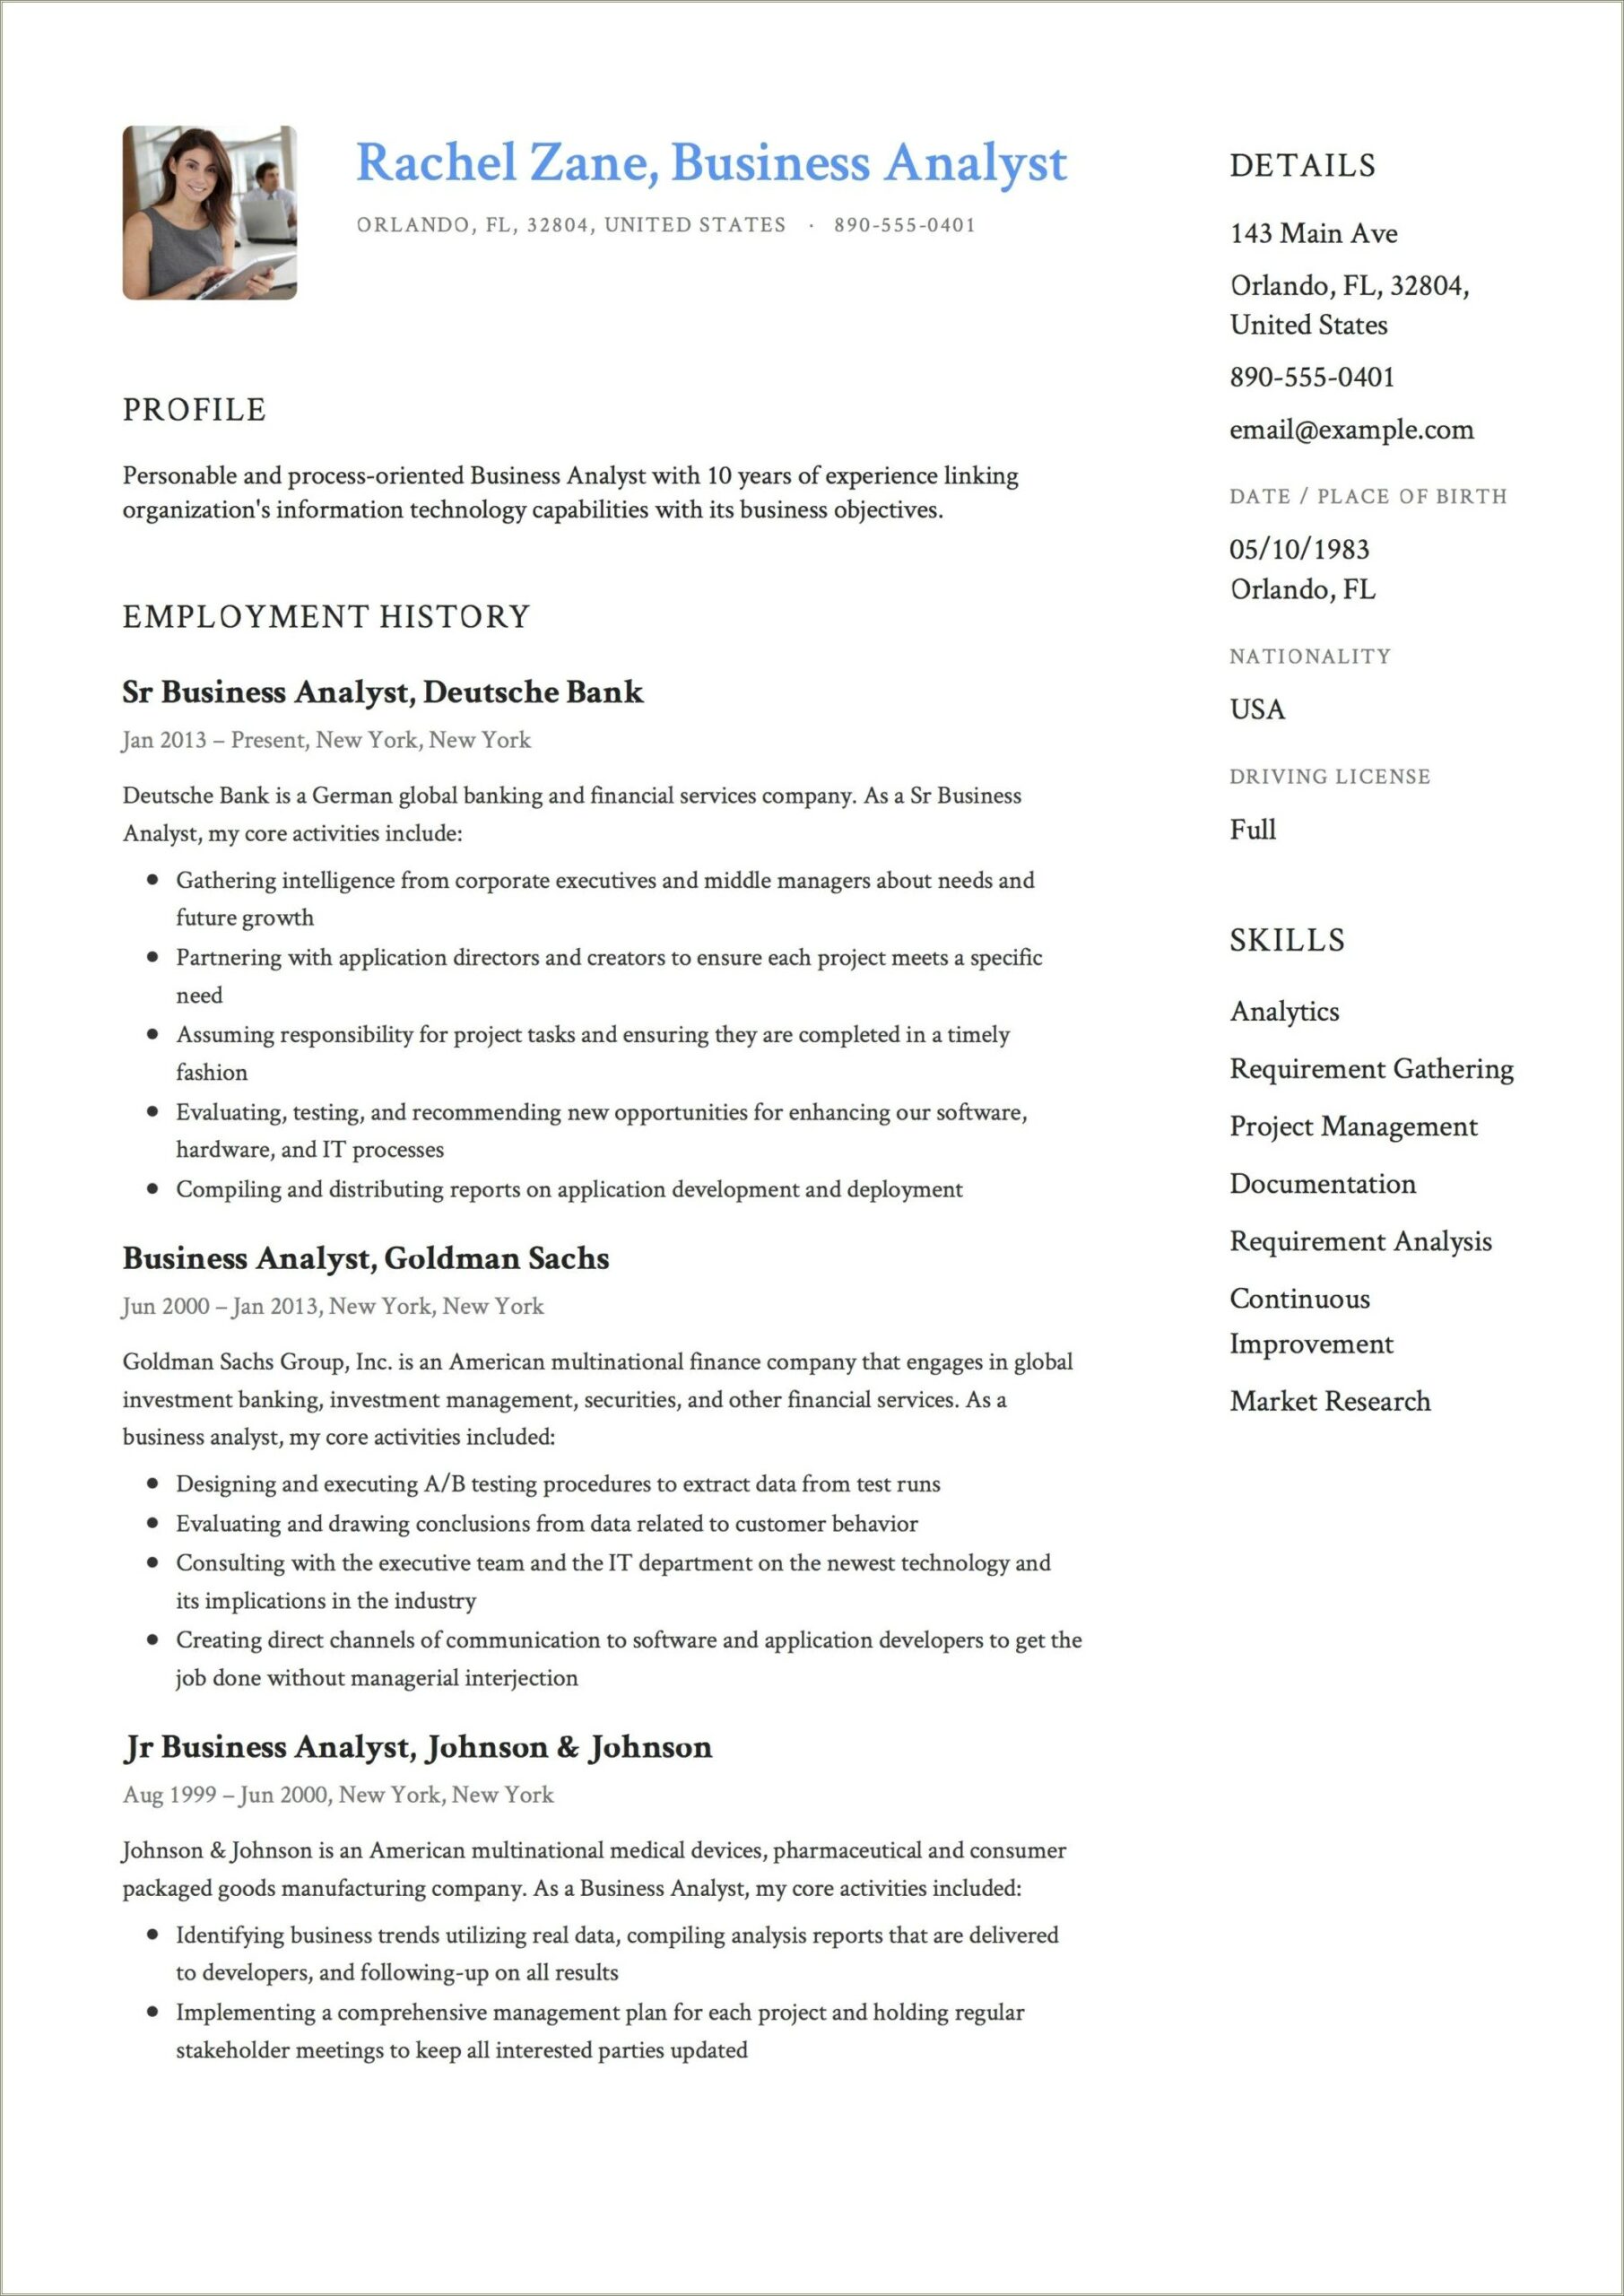 Resume Highlights For Business Intelligence Manager